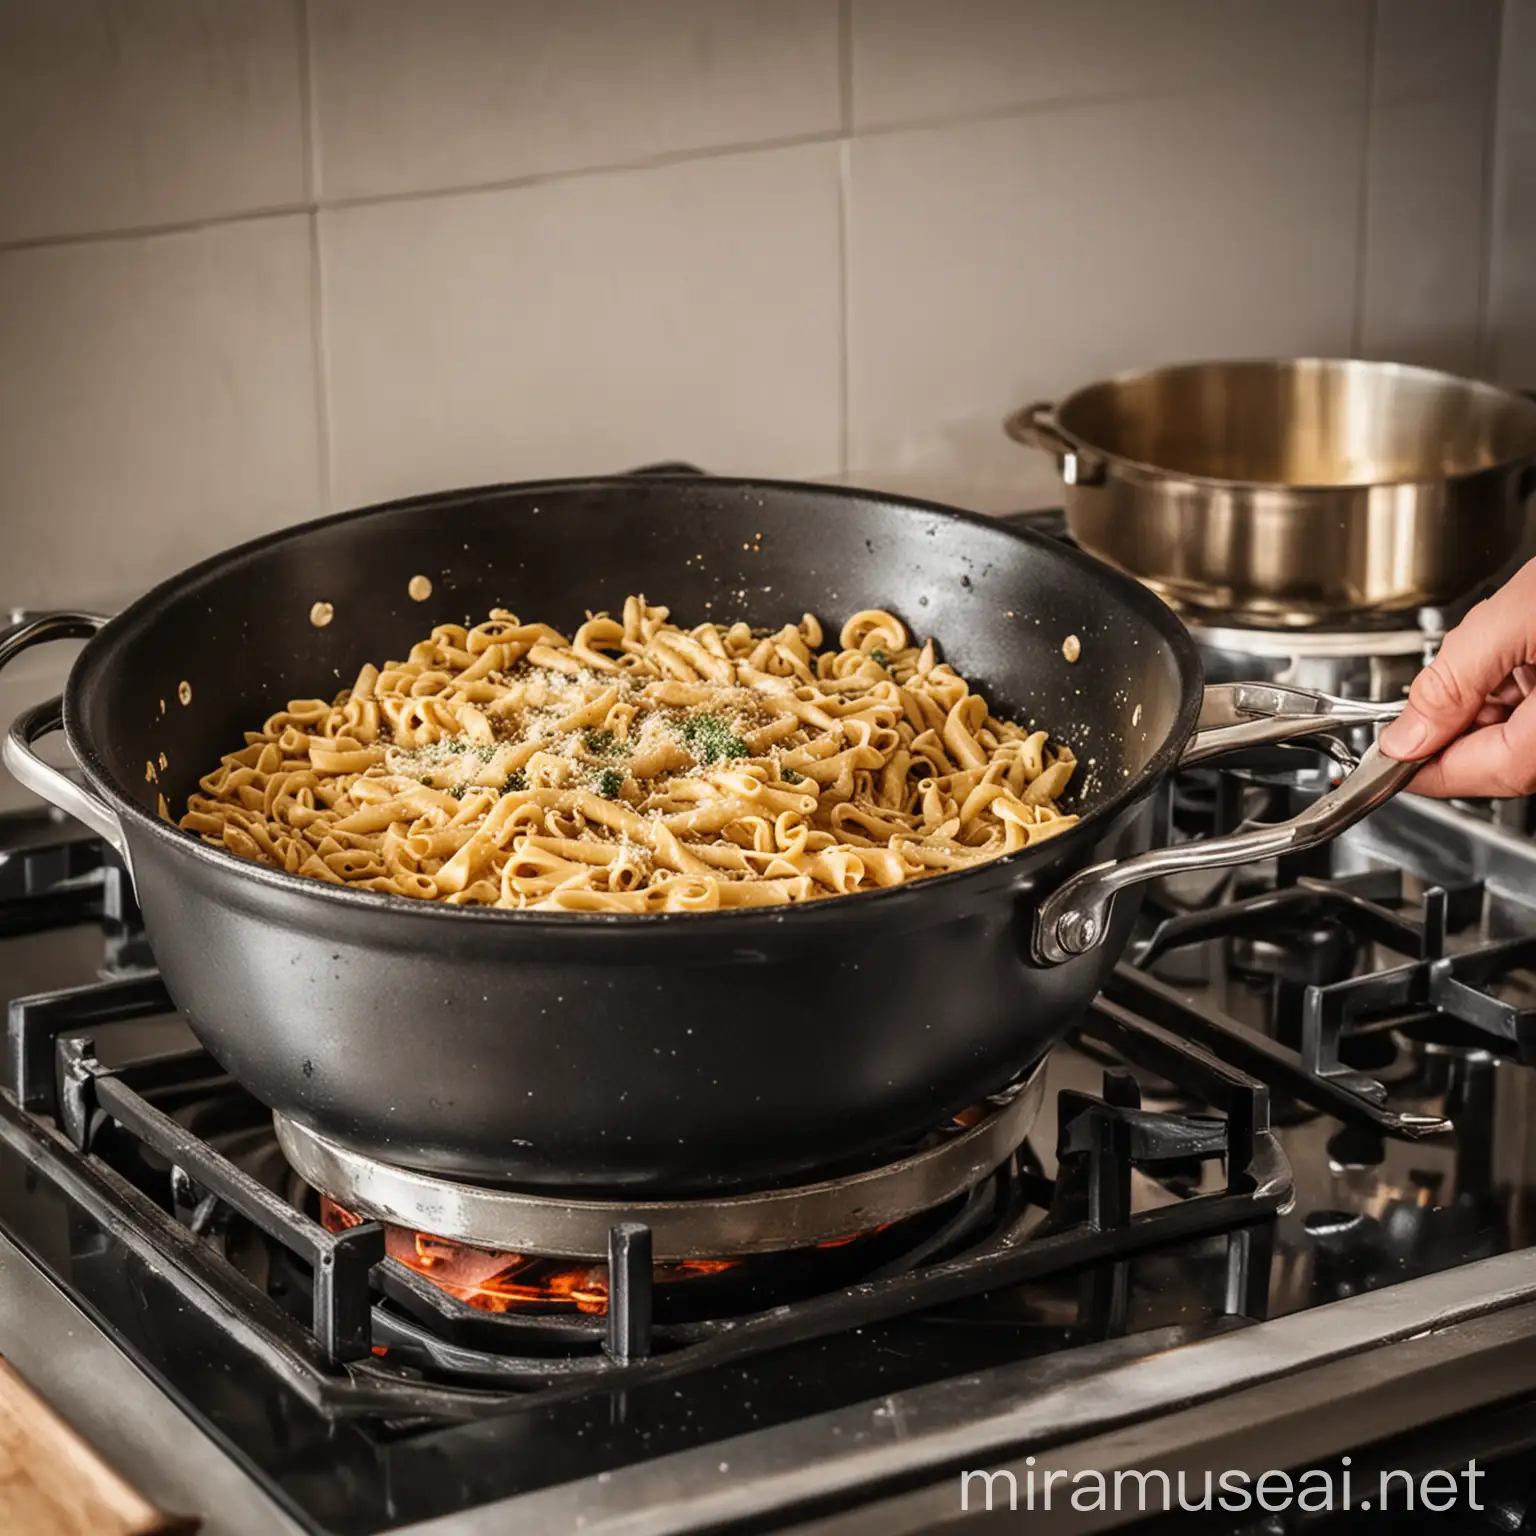 Cooking Pasta on the Stove